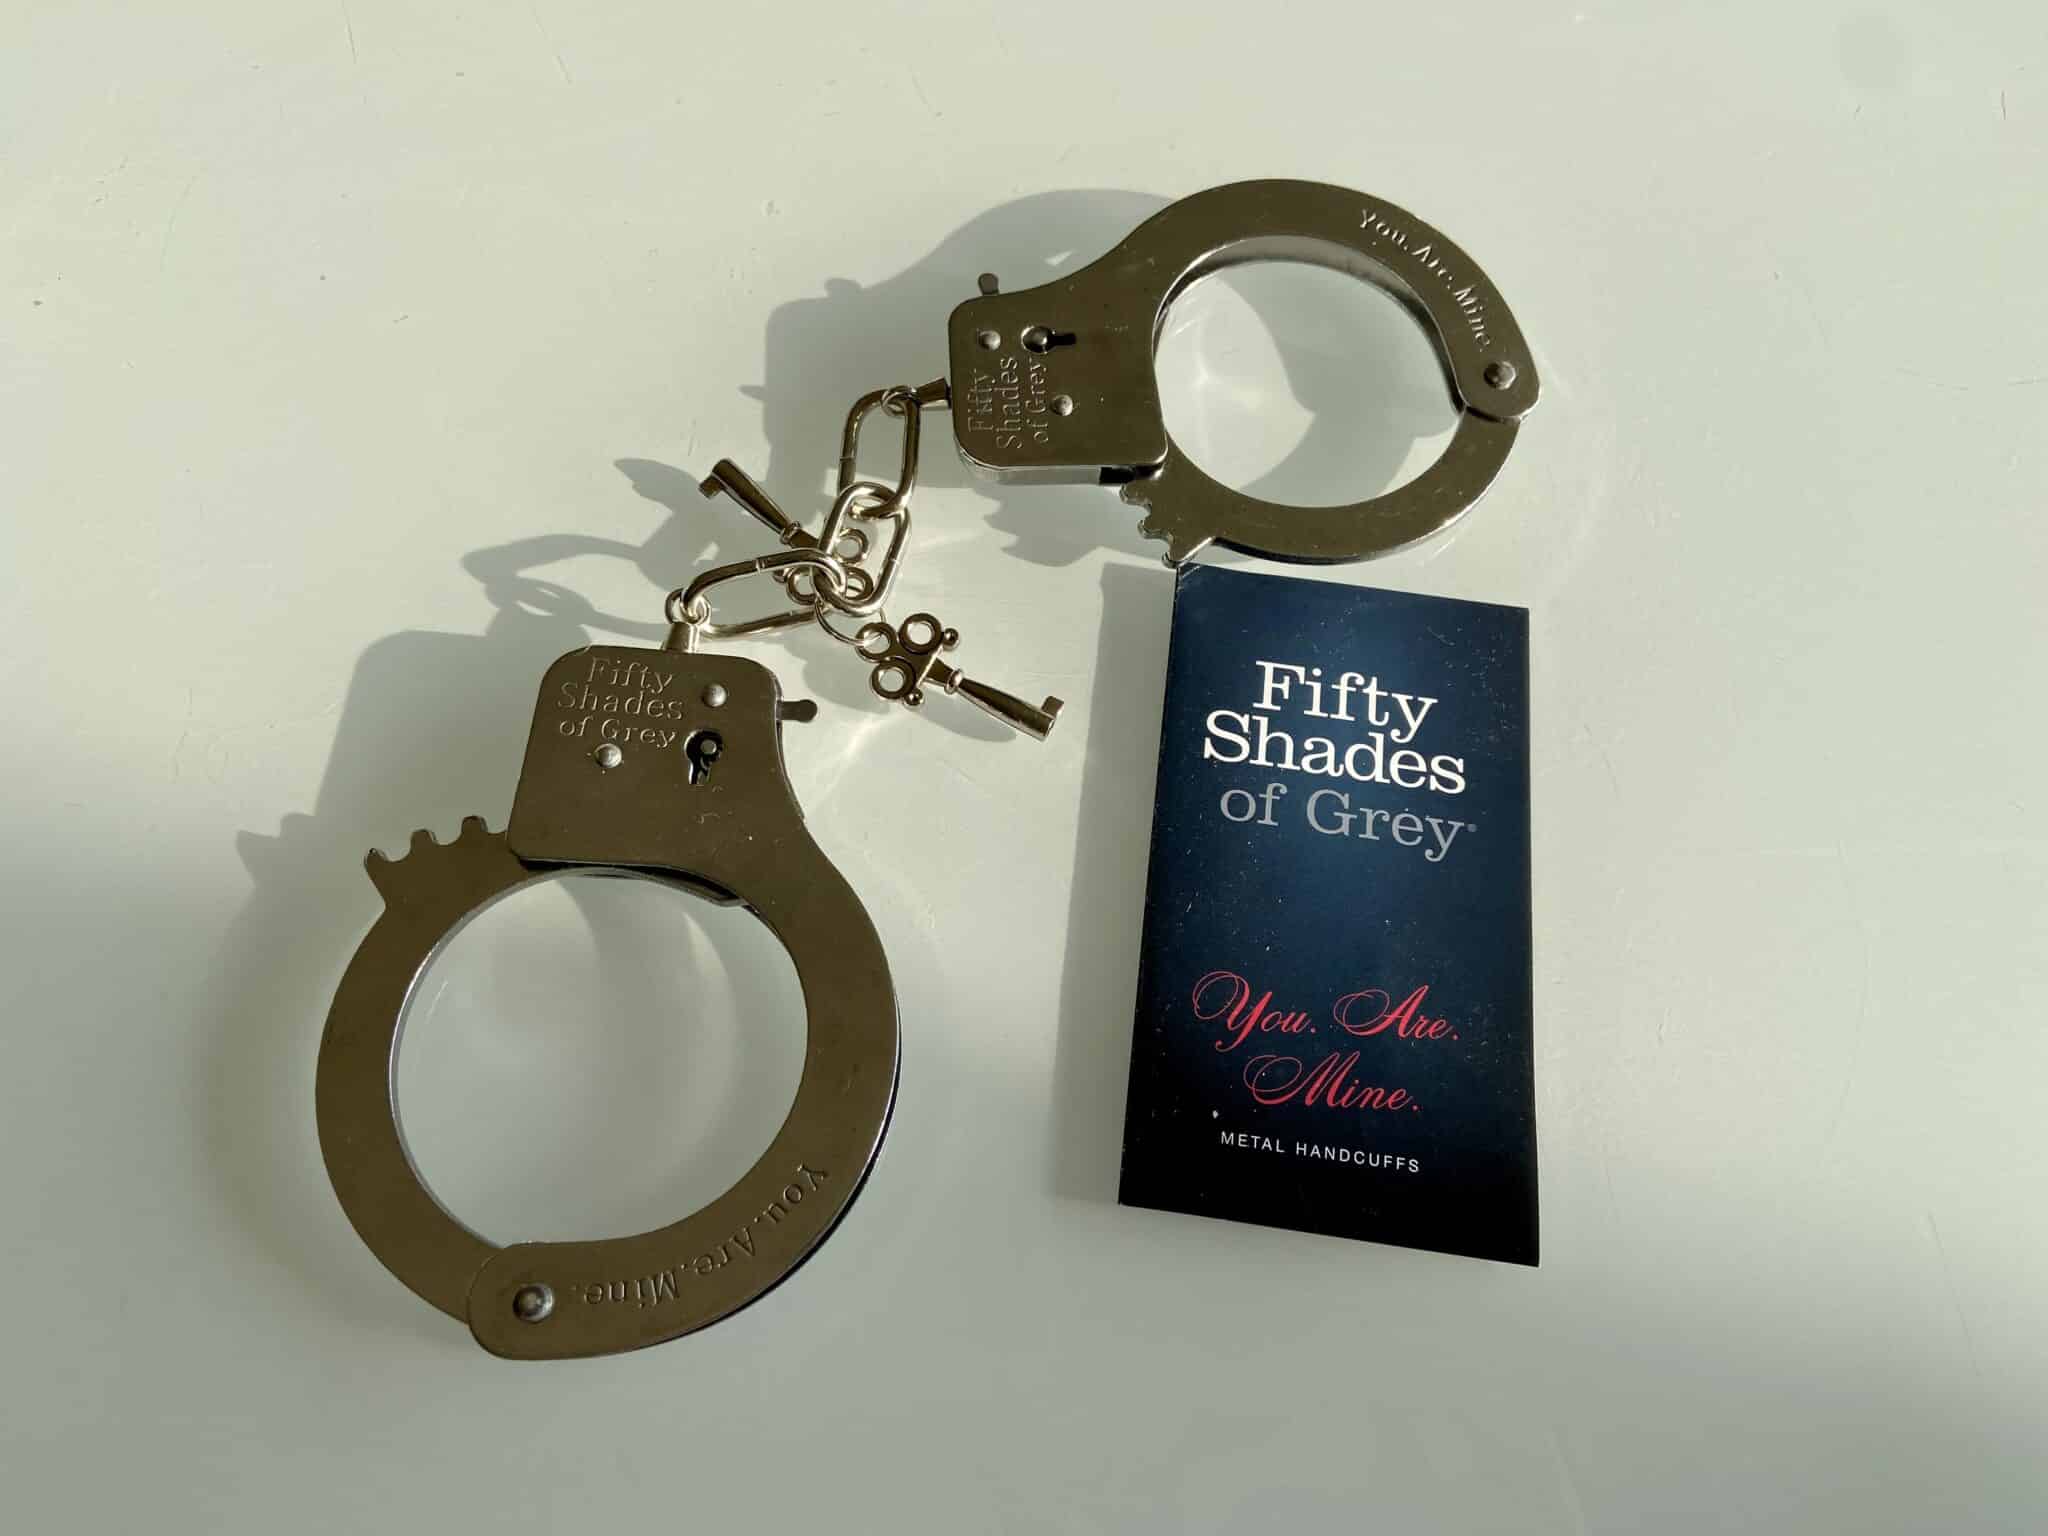 Fifty Shades of Grey You. Are. Mine. Metal Handcuffs. Slide 9